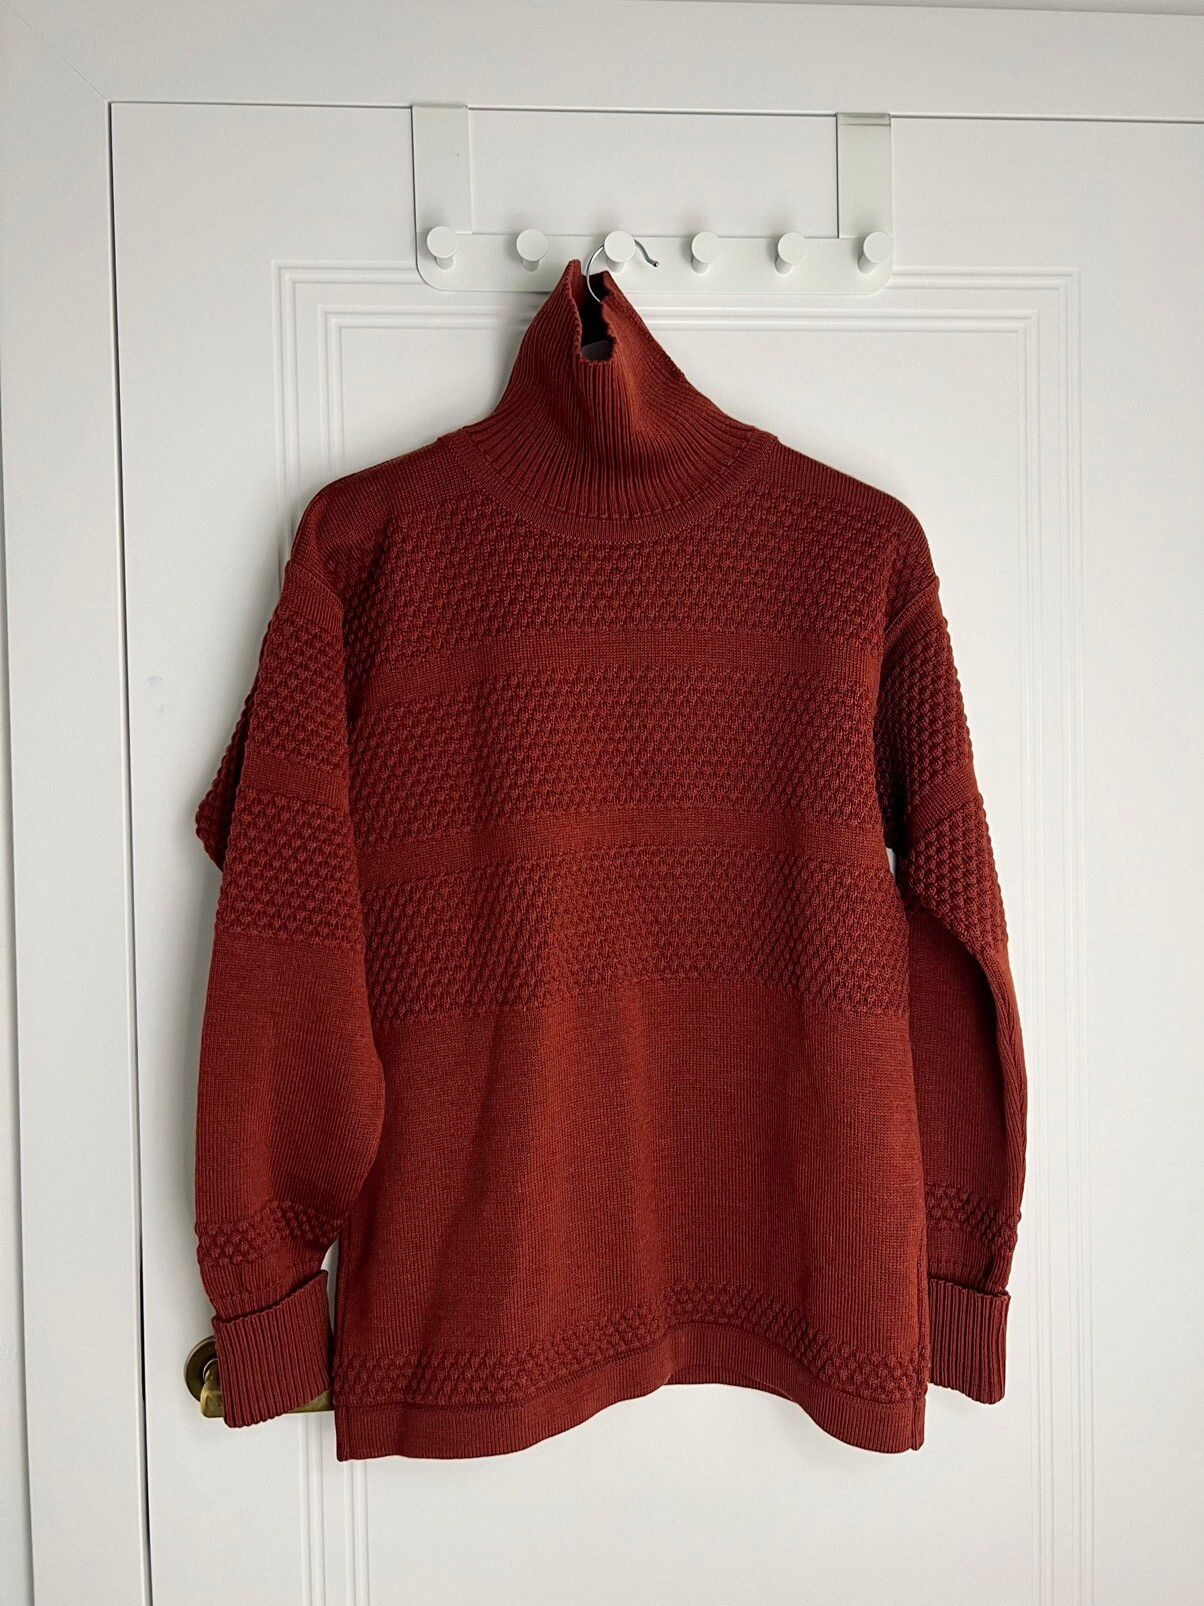 S.N.S. Herning Wool Sweater Size US M / EU 48-50 / 2 - 1 Preview